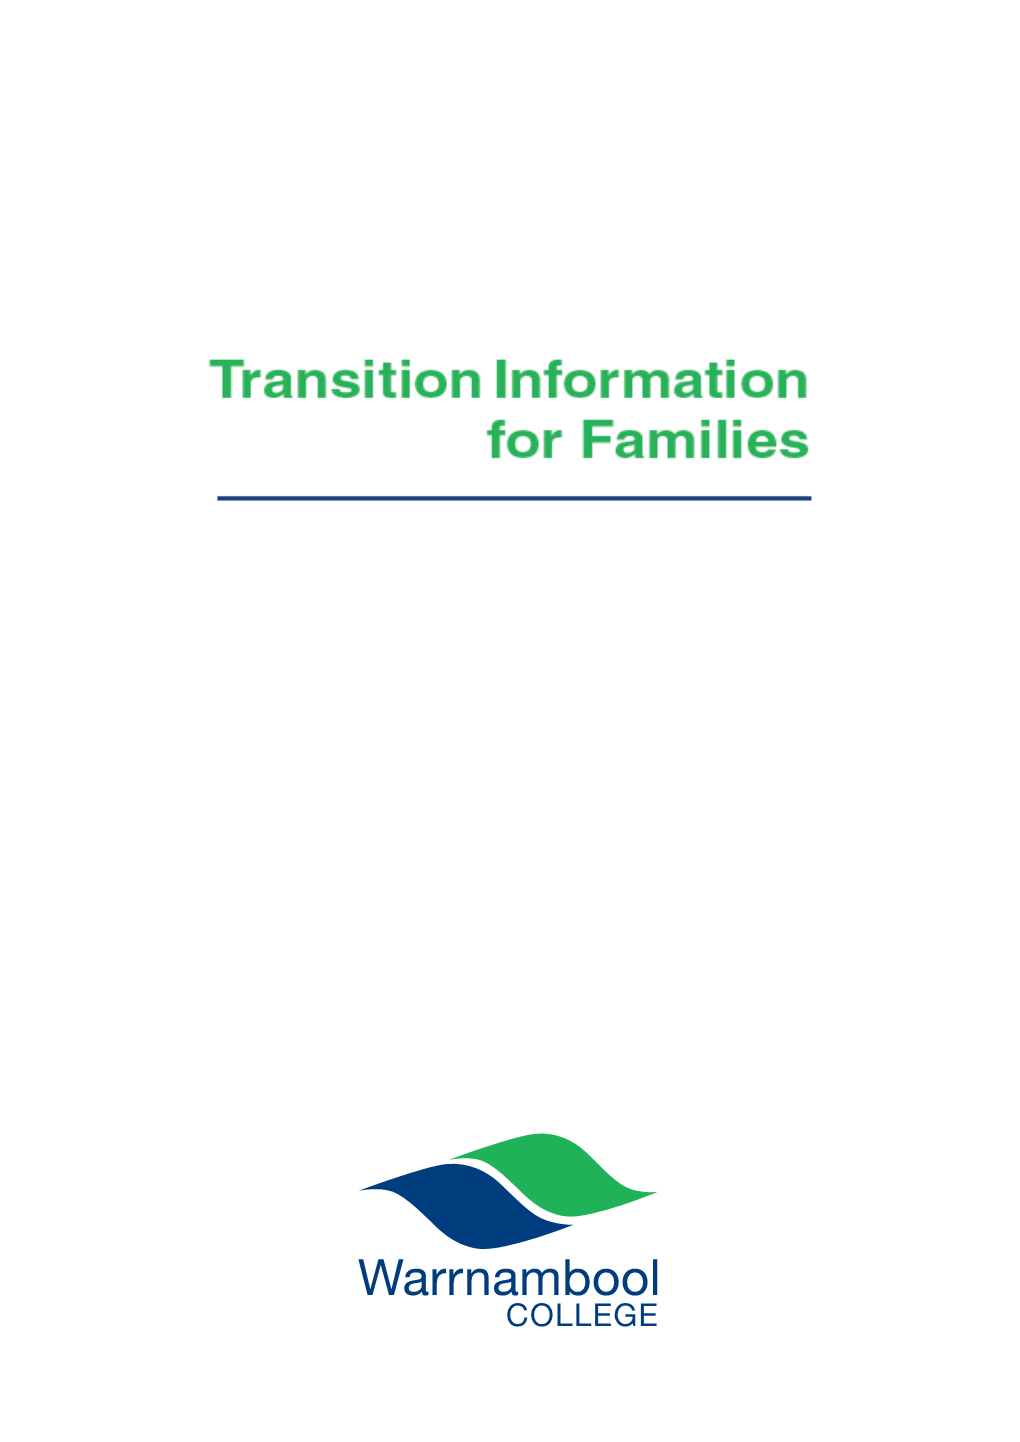 A4 Transition Information for Families.Indd